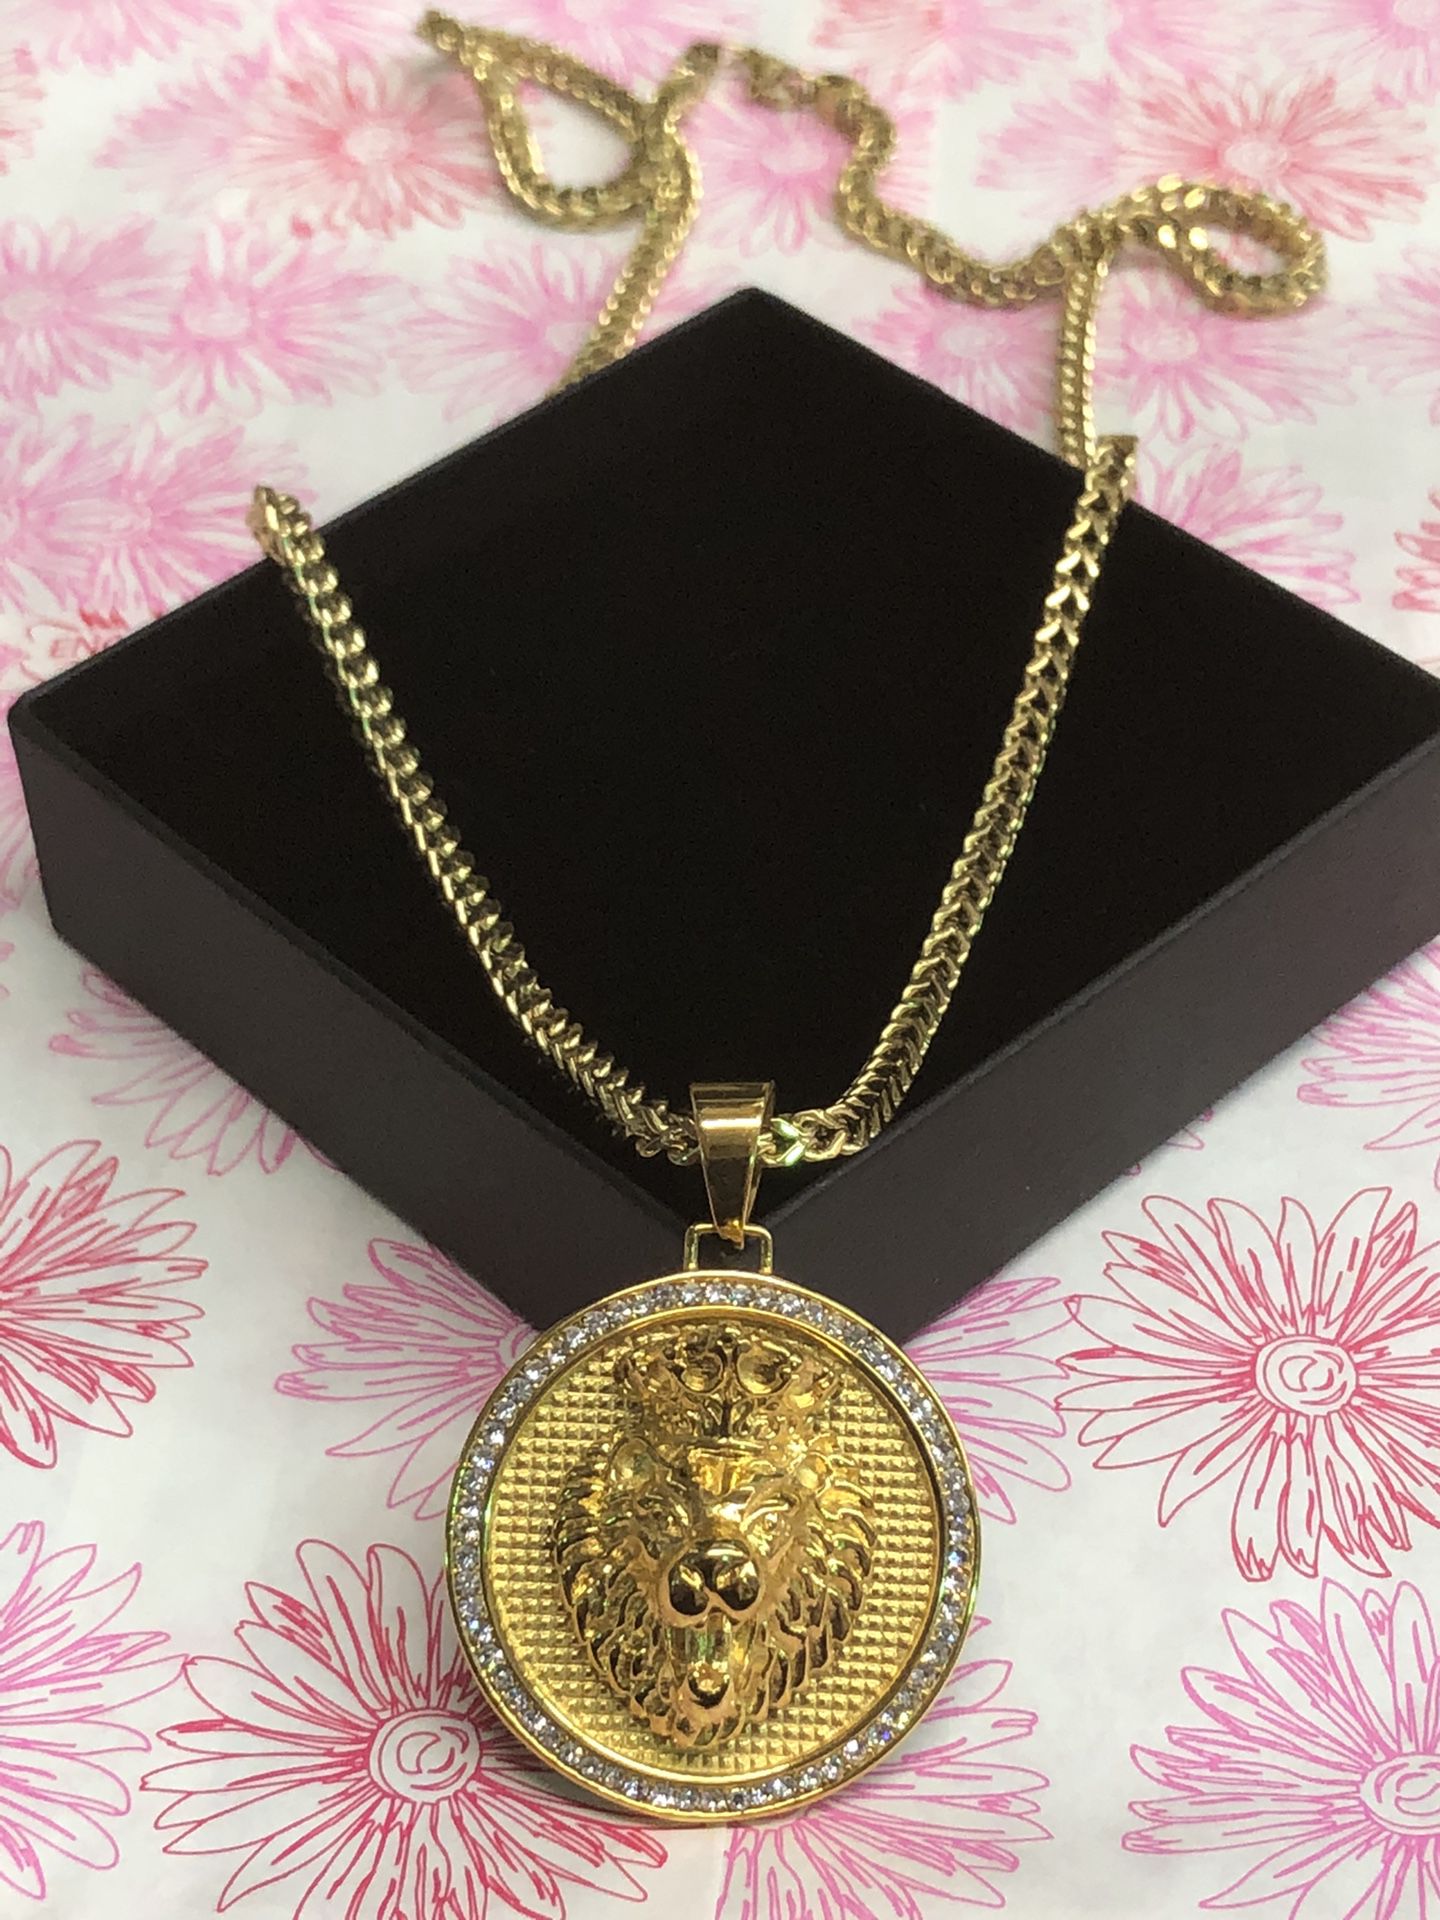 Stainless steel gold lion 🦁 head and 30” Franco necklace best quality 💯✅💯✅💯